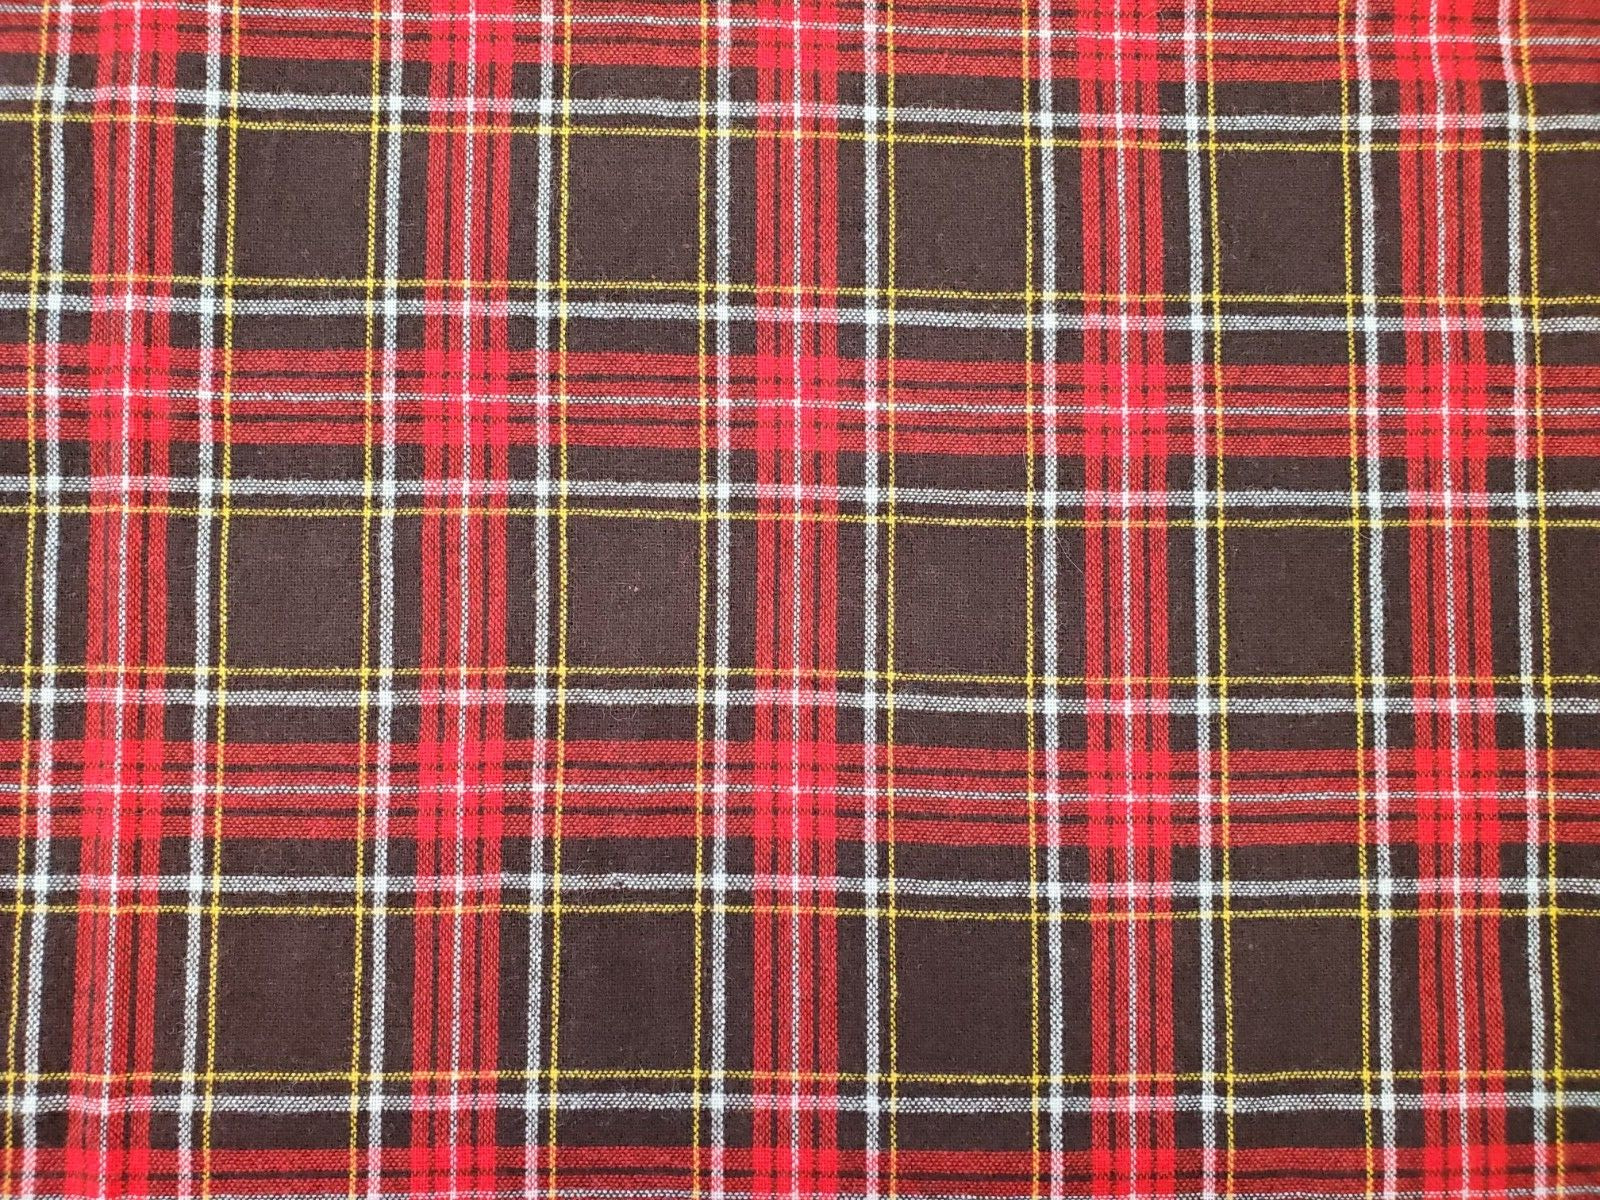 Vintage Plaid Fabric Red Brown Woven 2.5 Yards x 59 Inches